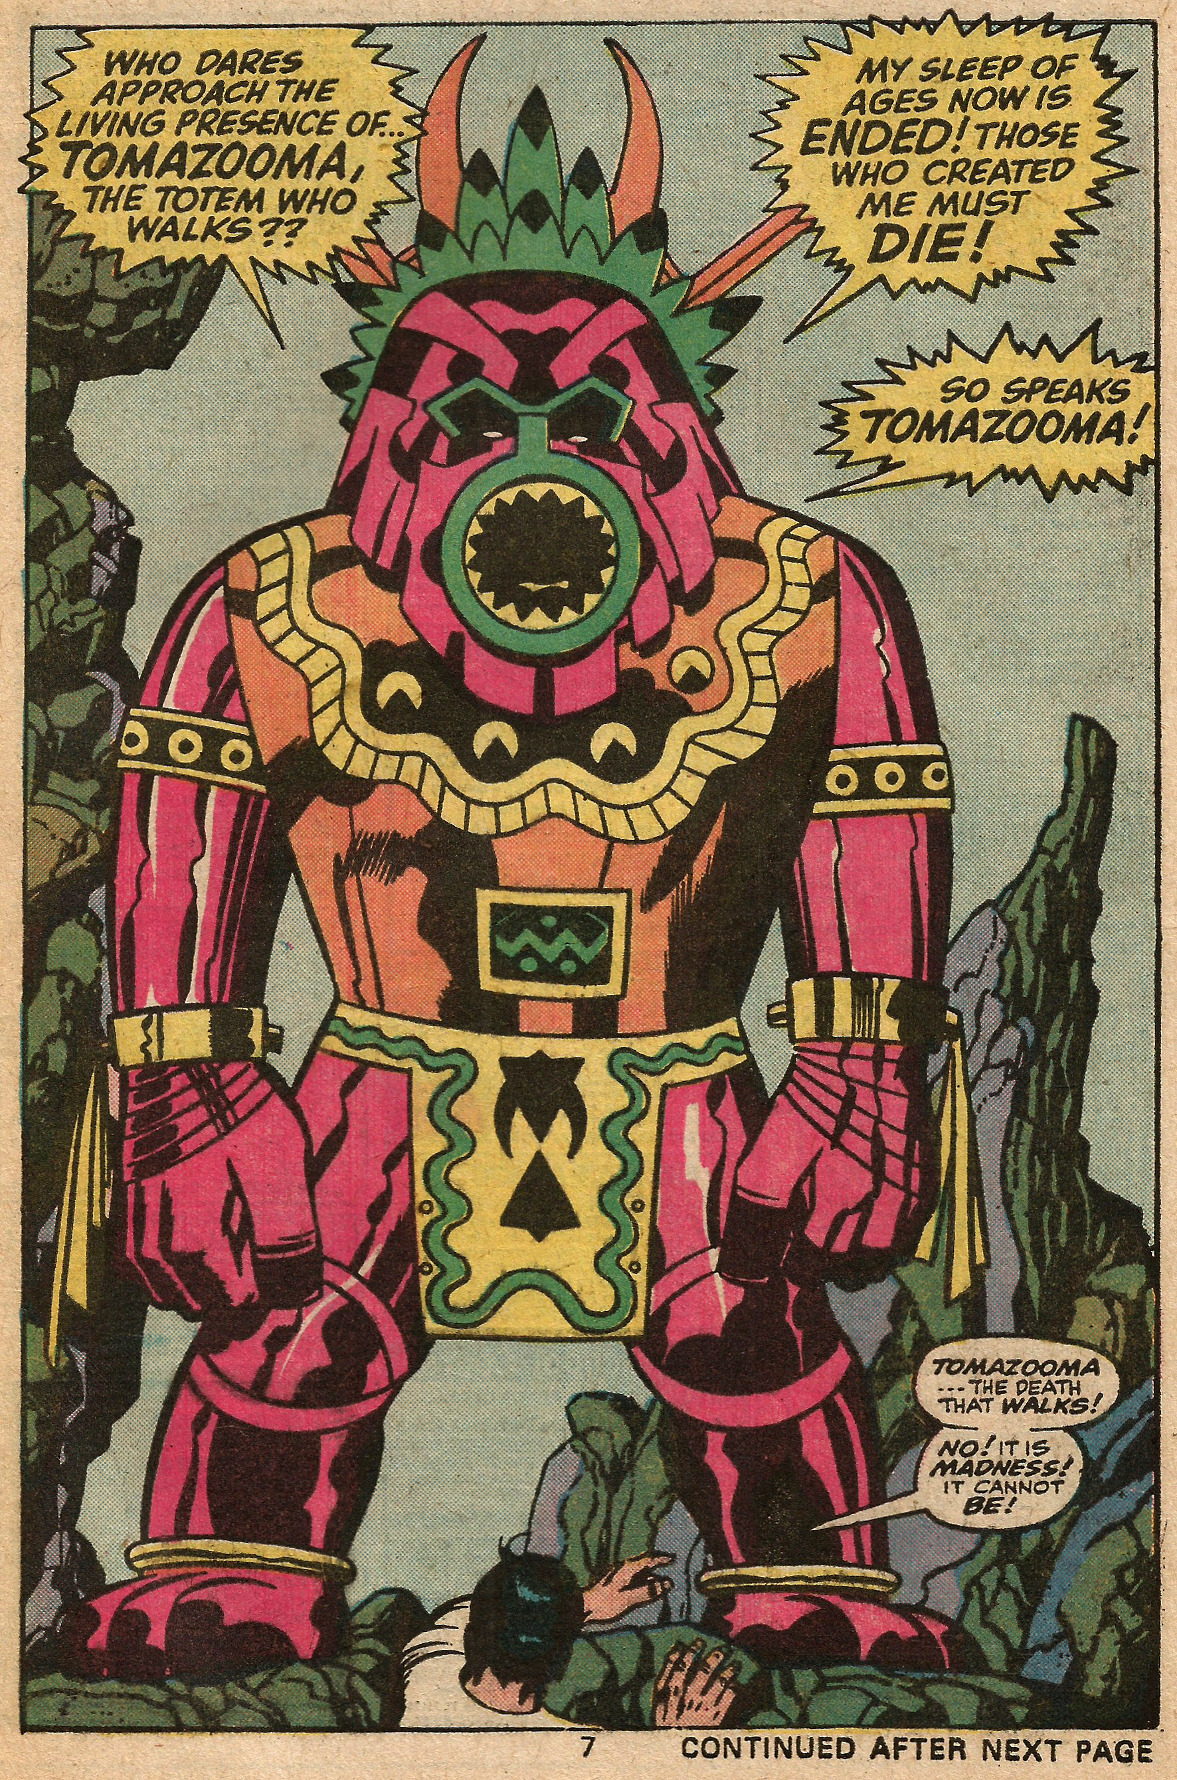 Splash page by Jack Kirby, from Marvel&rsquo;s Greatest Comics starring The Fantastic